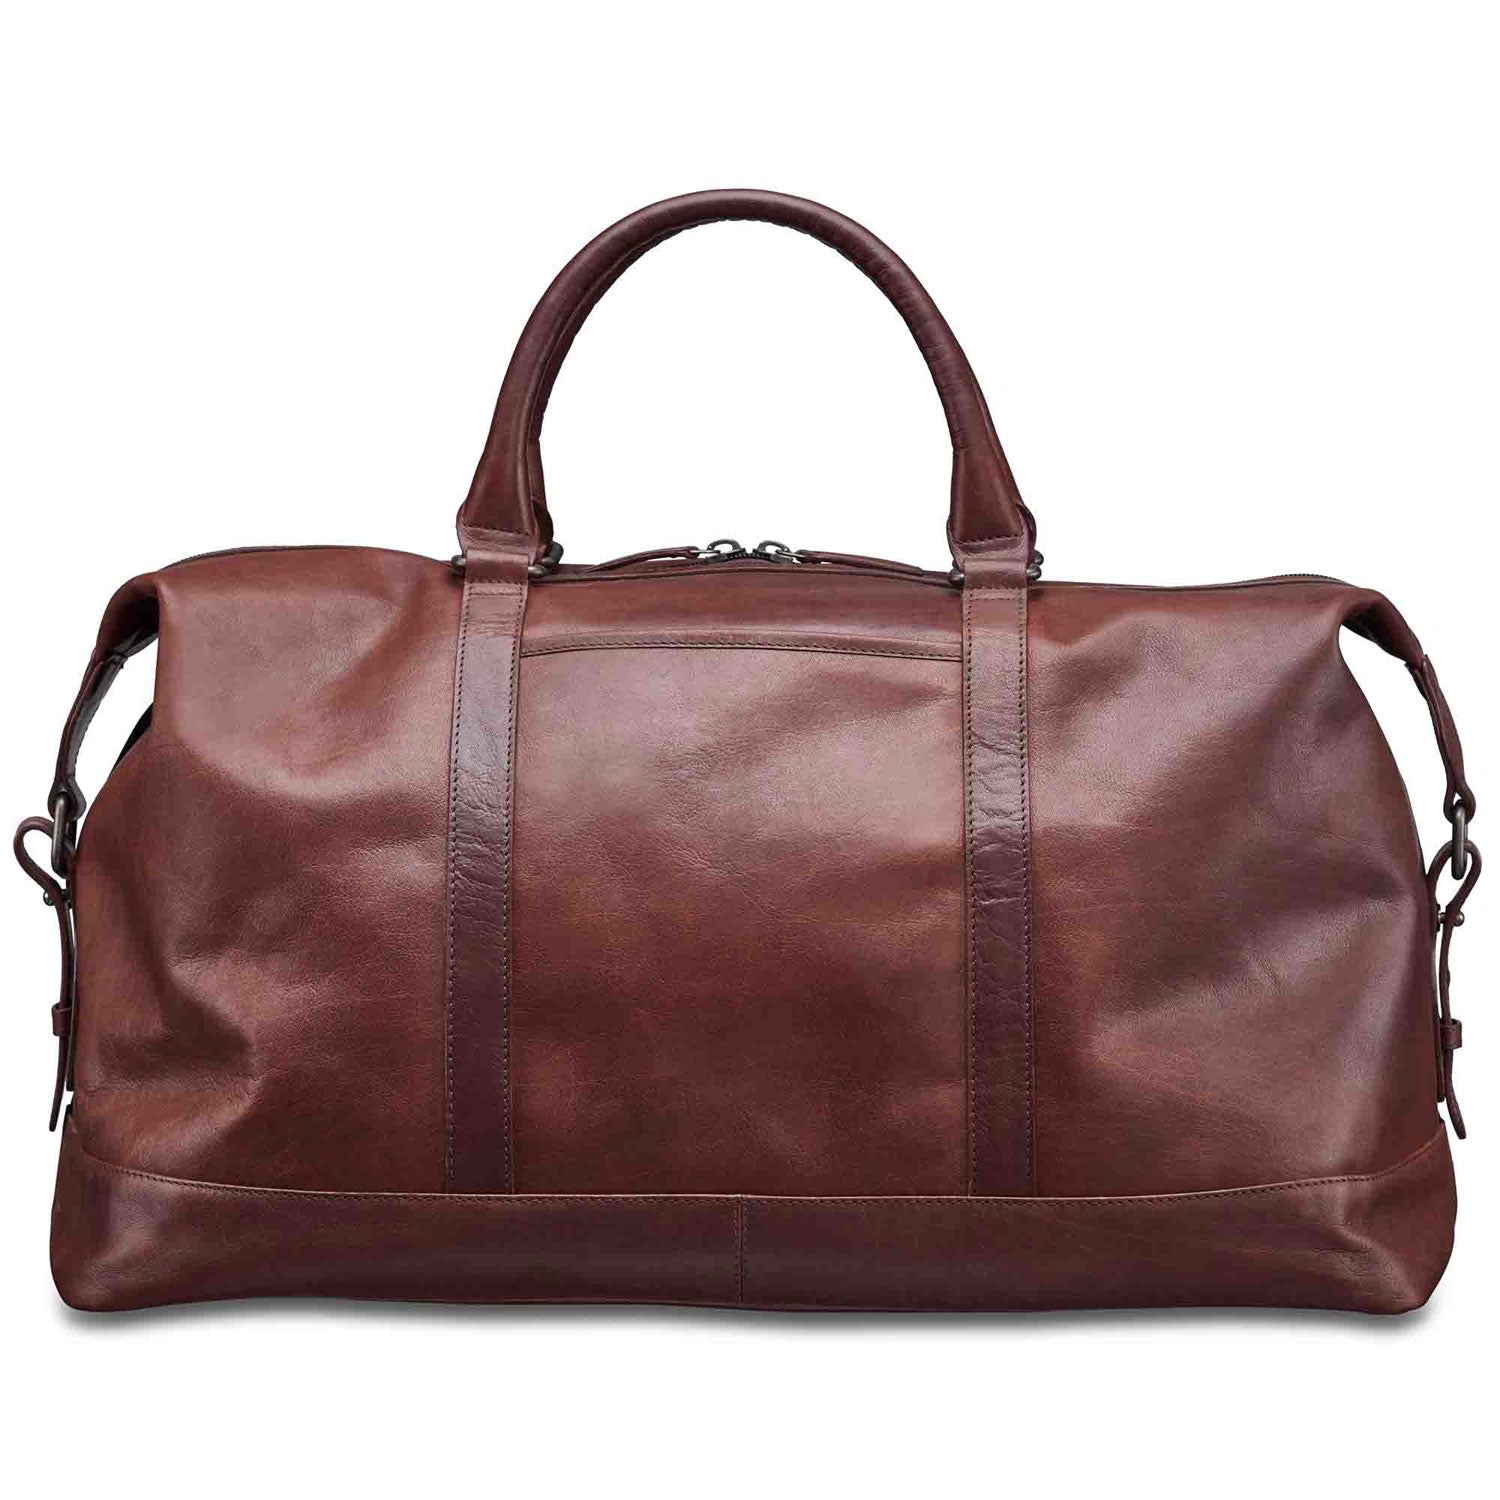 Mancini Leather Carry-on Duffle Bag, 20" x 10" x 12", Brown